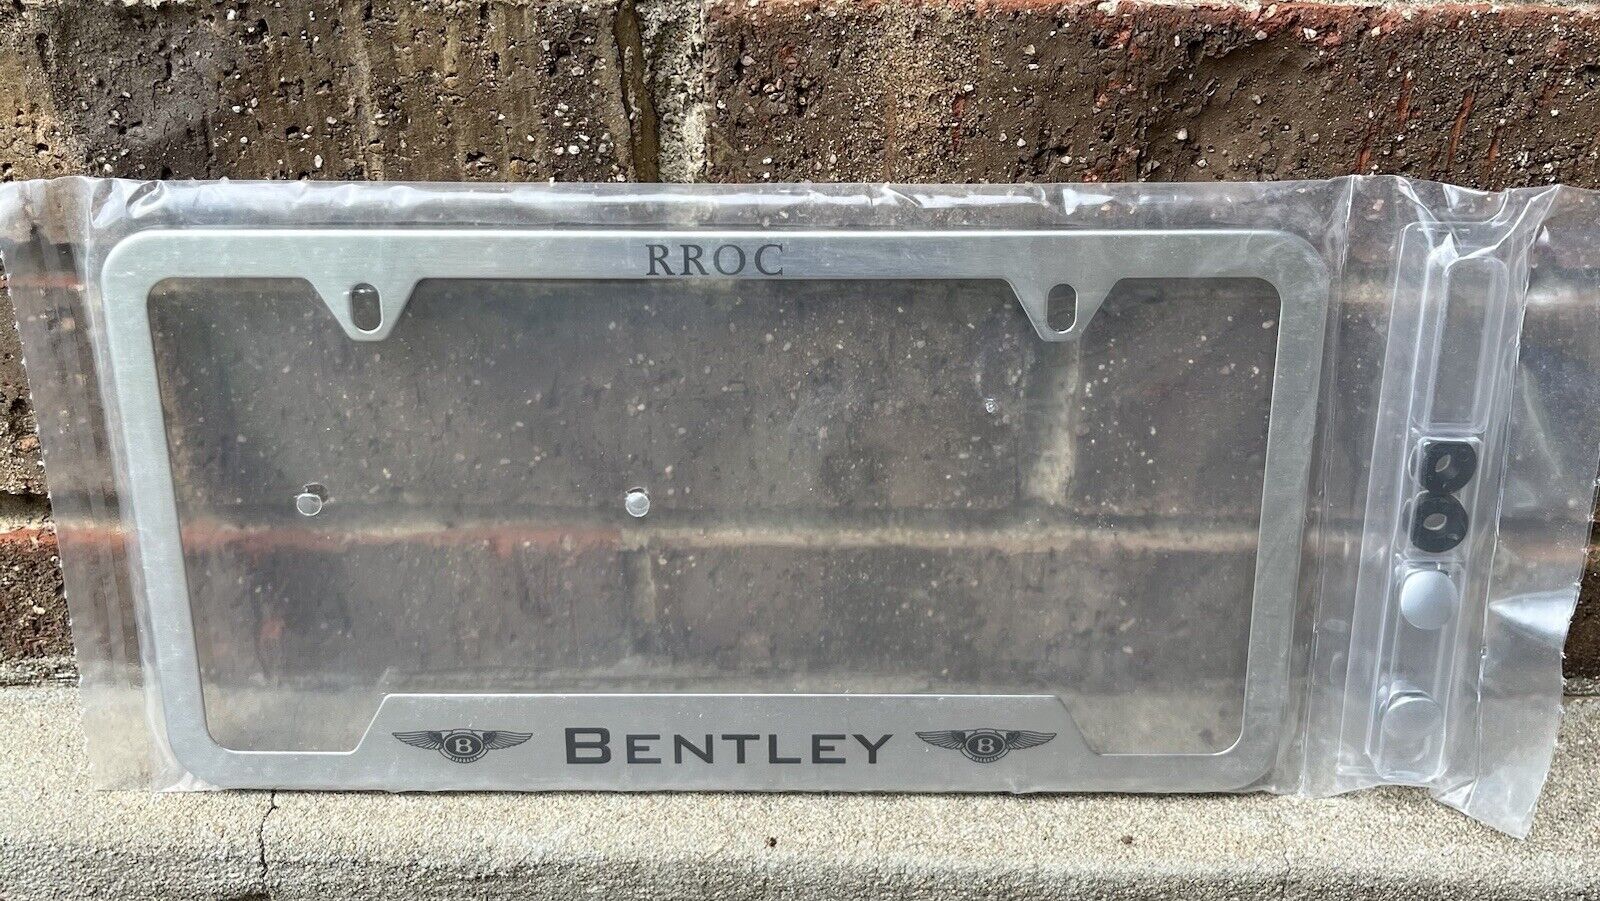 NEW Rolls-Royce Owners Club RROC BENTLEY License Plate Frame Rare MEMBERS ONLY